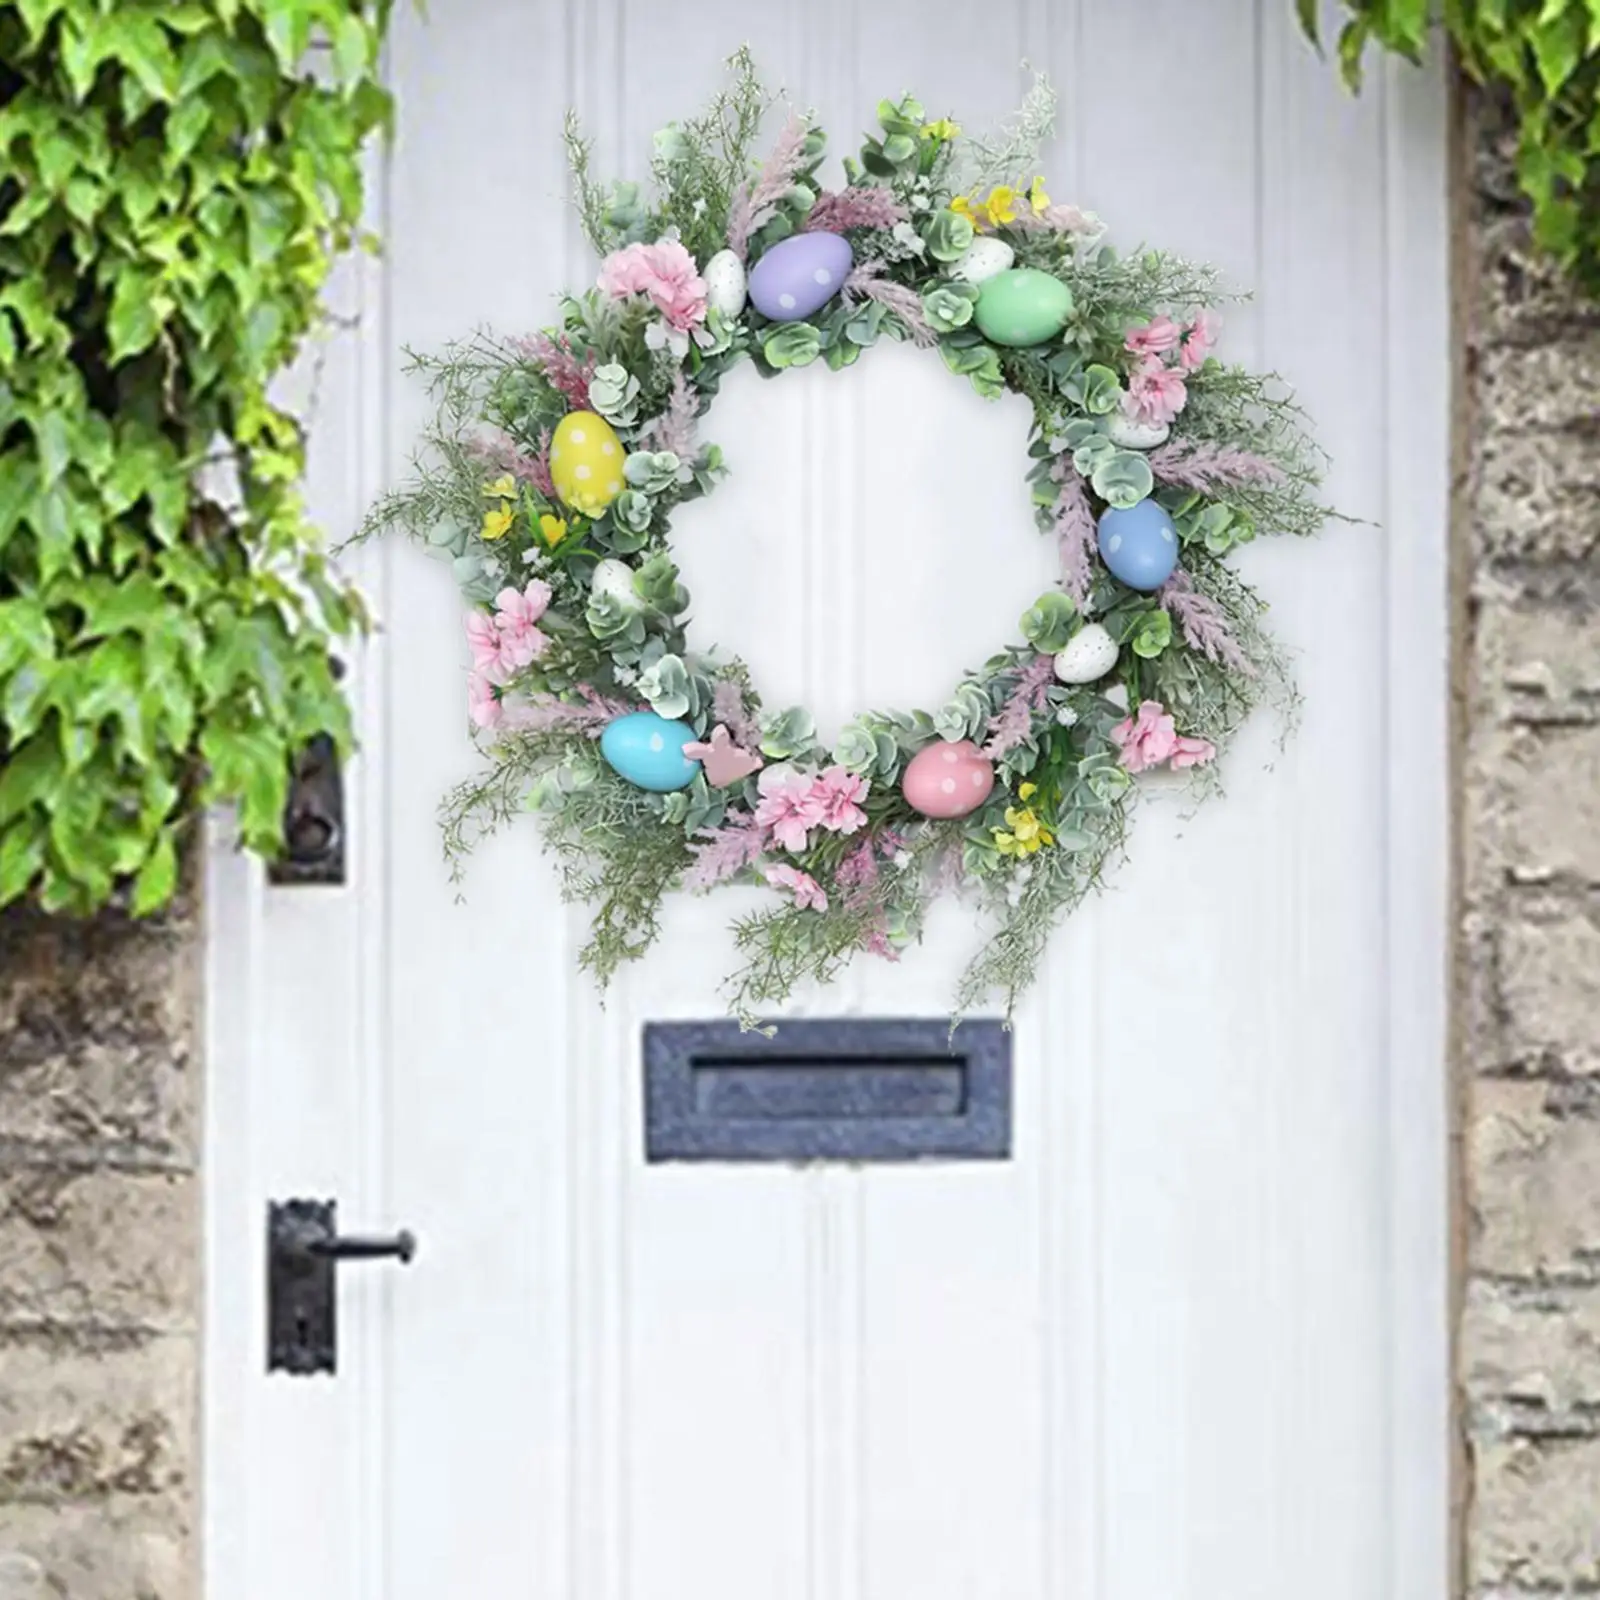 Round Easter Egg Flower Wreath Front Door with Colorful Eggs Decorative Hanging